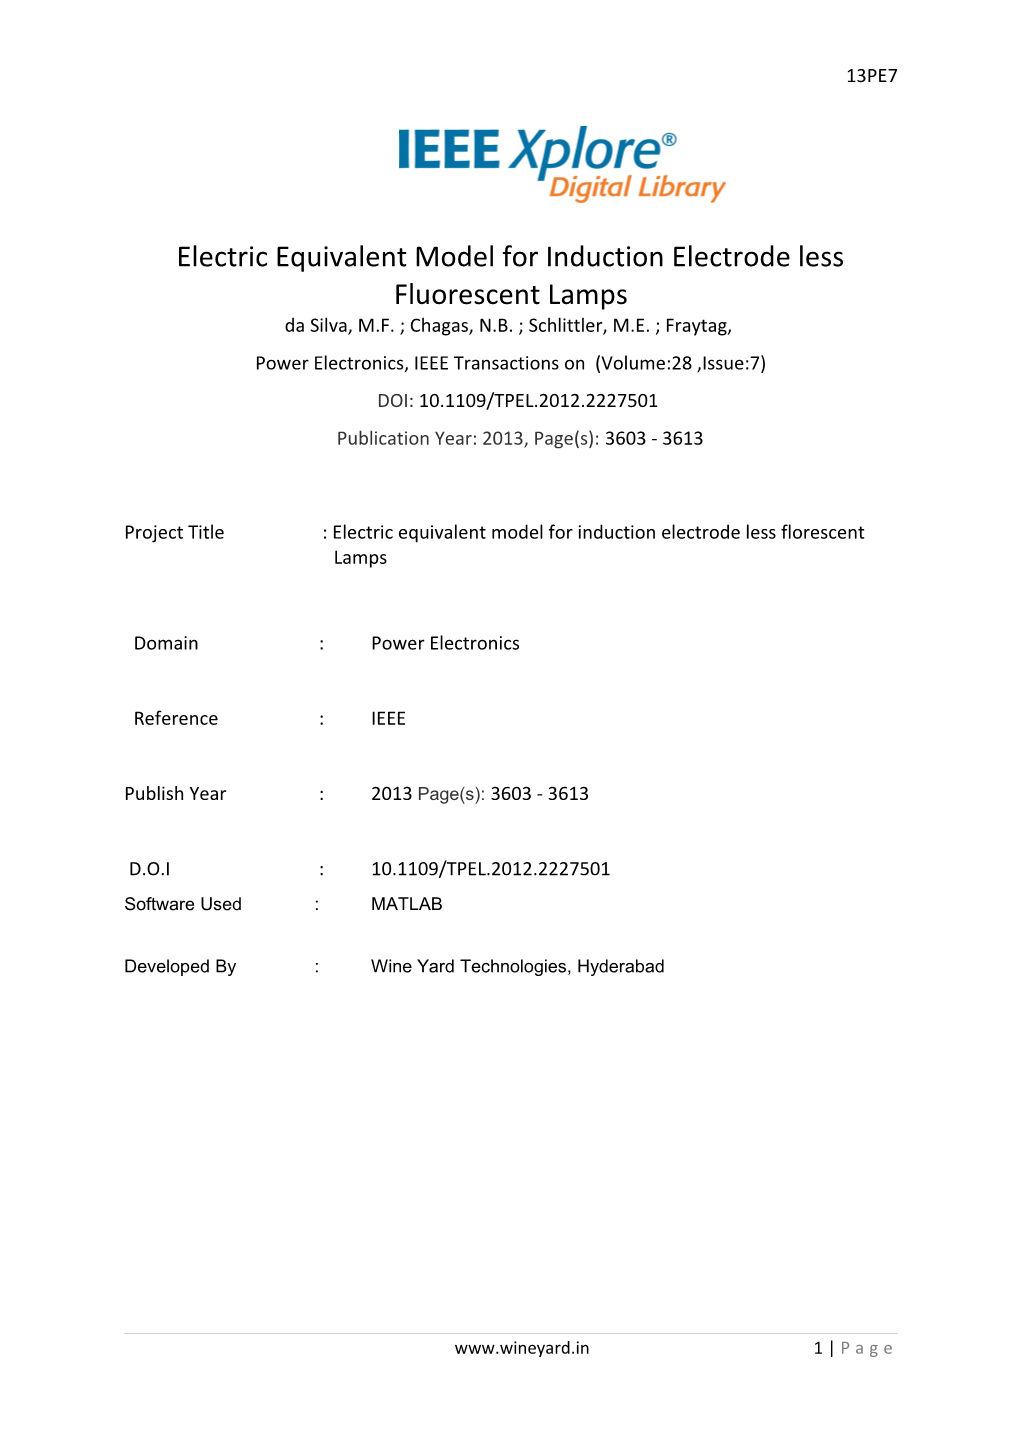 Electric Equivalent Model for Induction Electrode Less Fluorescent Lamps